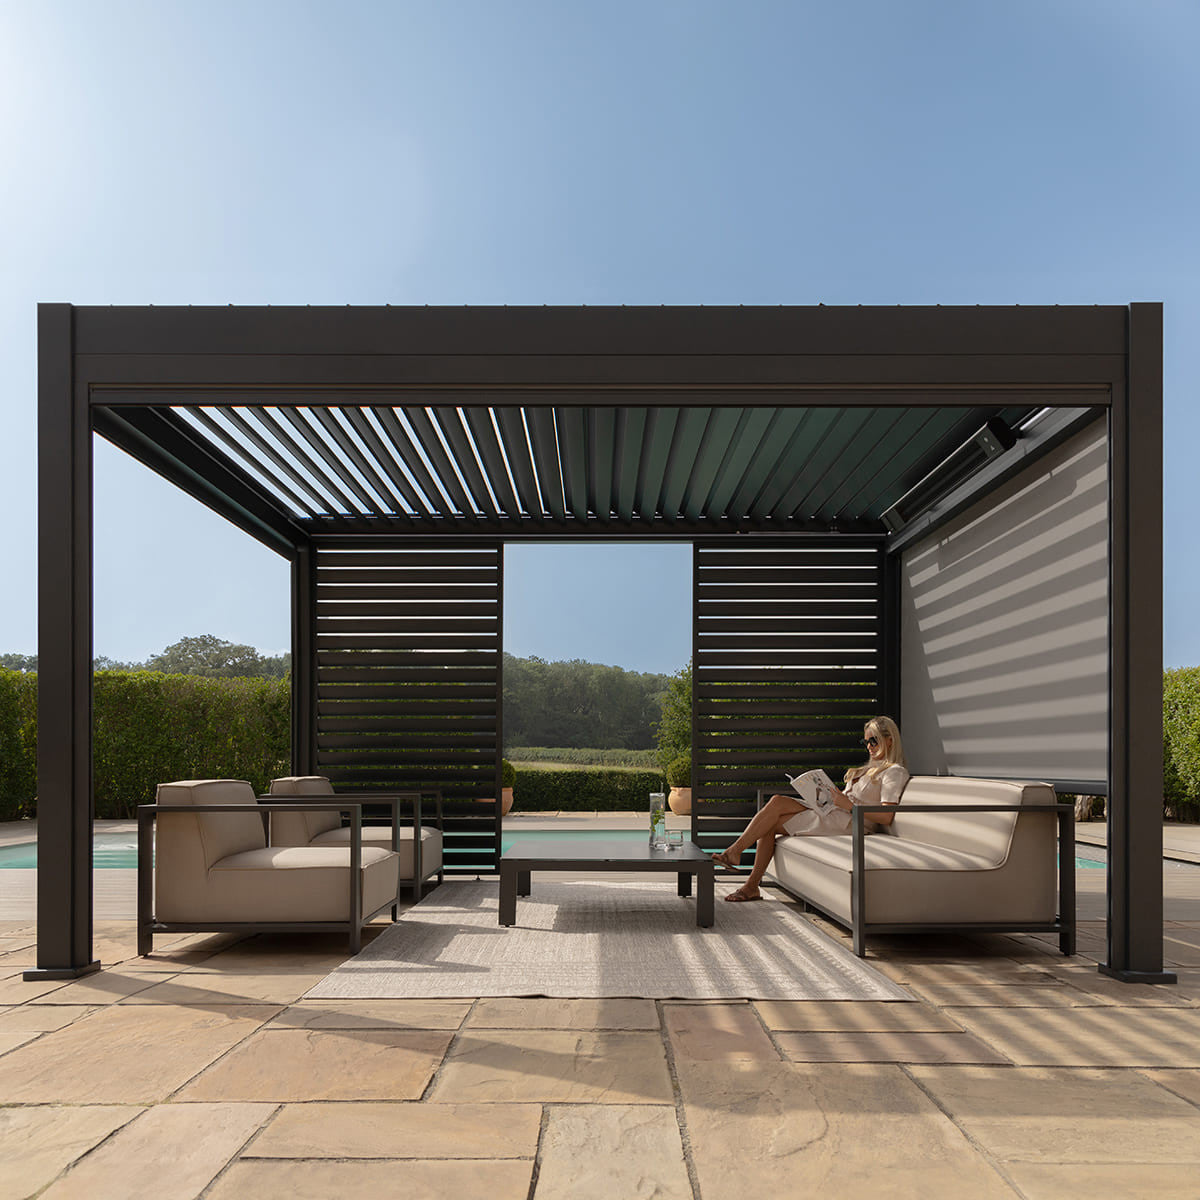 Maze Eden Pergola Aluminium Rectangular 4Mx4M Frame Only From Front With Blind Down-Better Bed Company